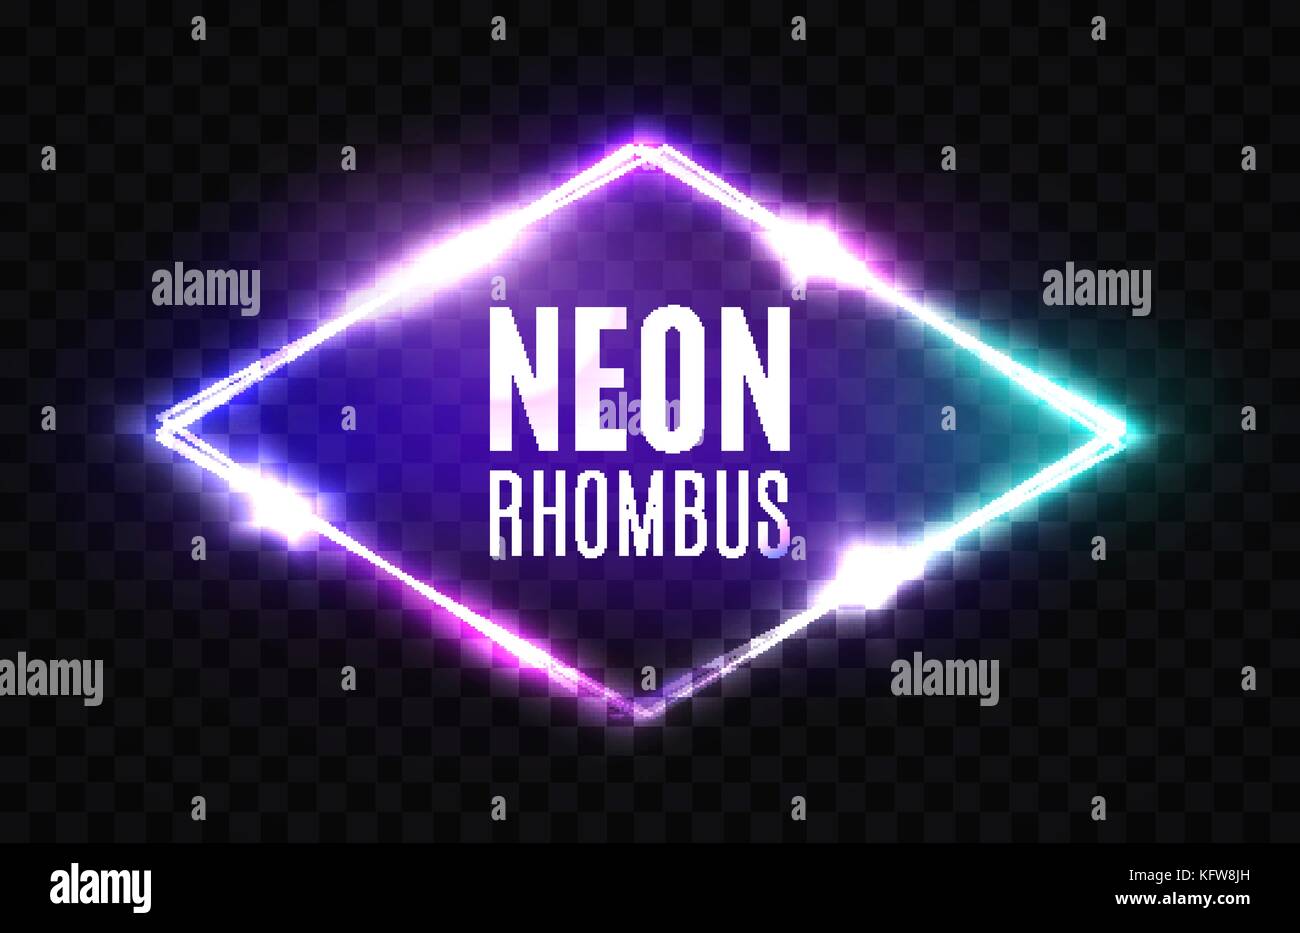 Night Club Neon Rhomb. 3d Retro Light Lozenge Sign With Neon Effect. Techno Rhombus Background. Glowing Brill Frame On Transparent Backdrop. Electric Street Diamond. Vector Illustration in 80s Style. Stock Vector